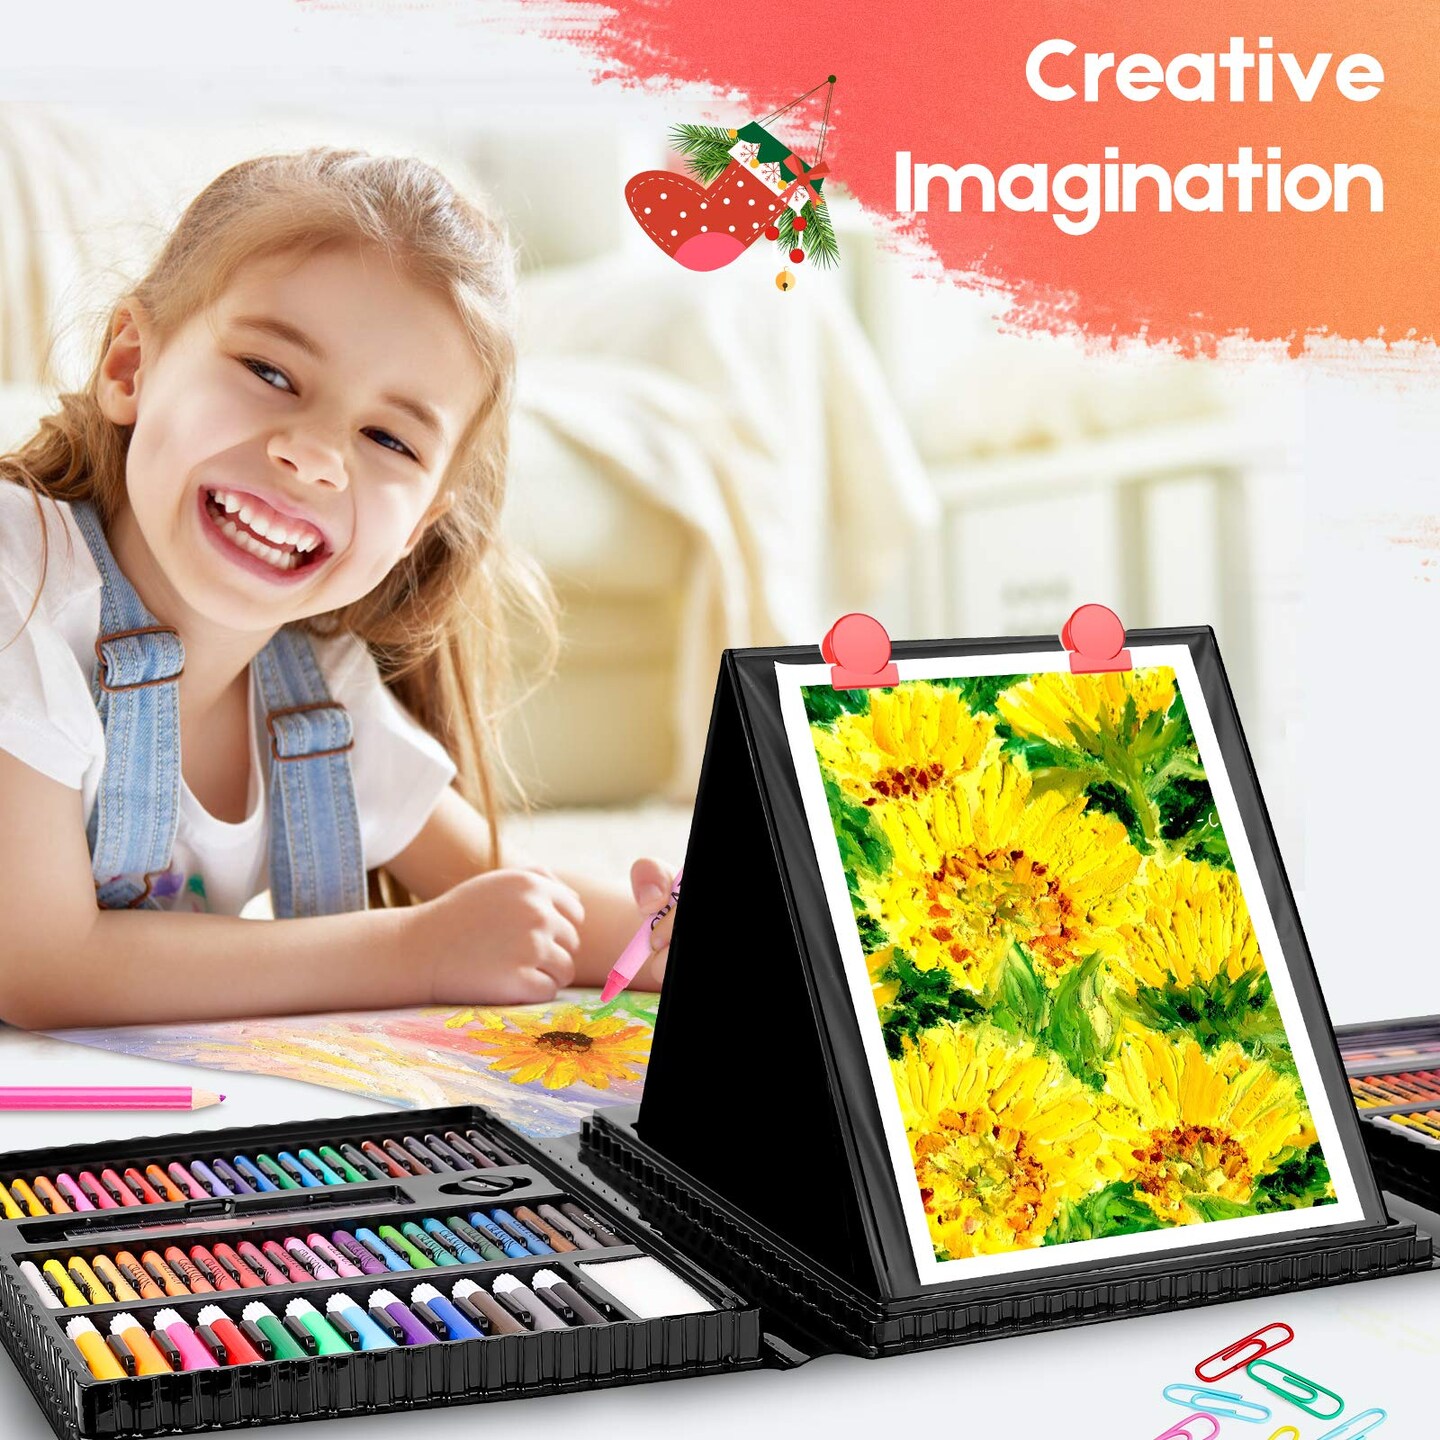 Caliart Premium Art Set - Includes Colored Pencils, Crayons, Pastels, Markers, Watercolor Cakes, and More for Kids and Teens